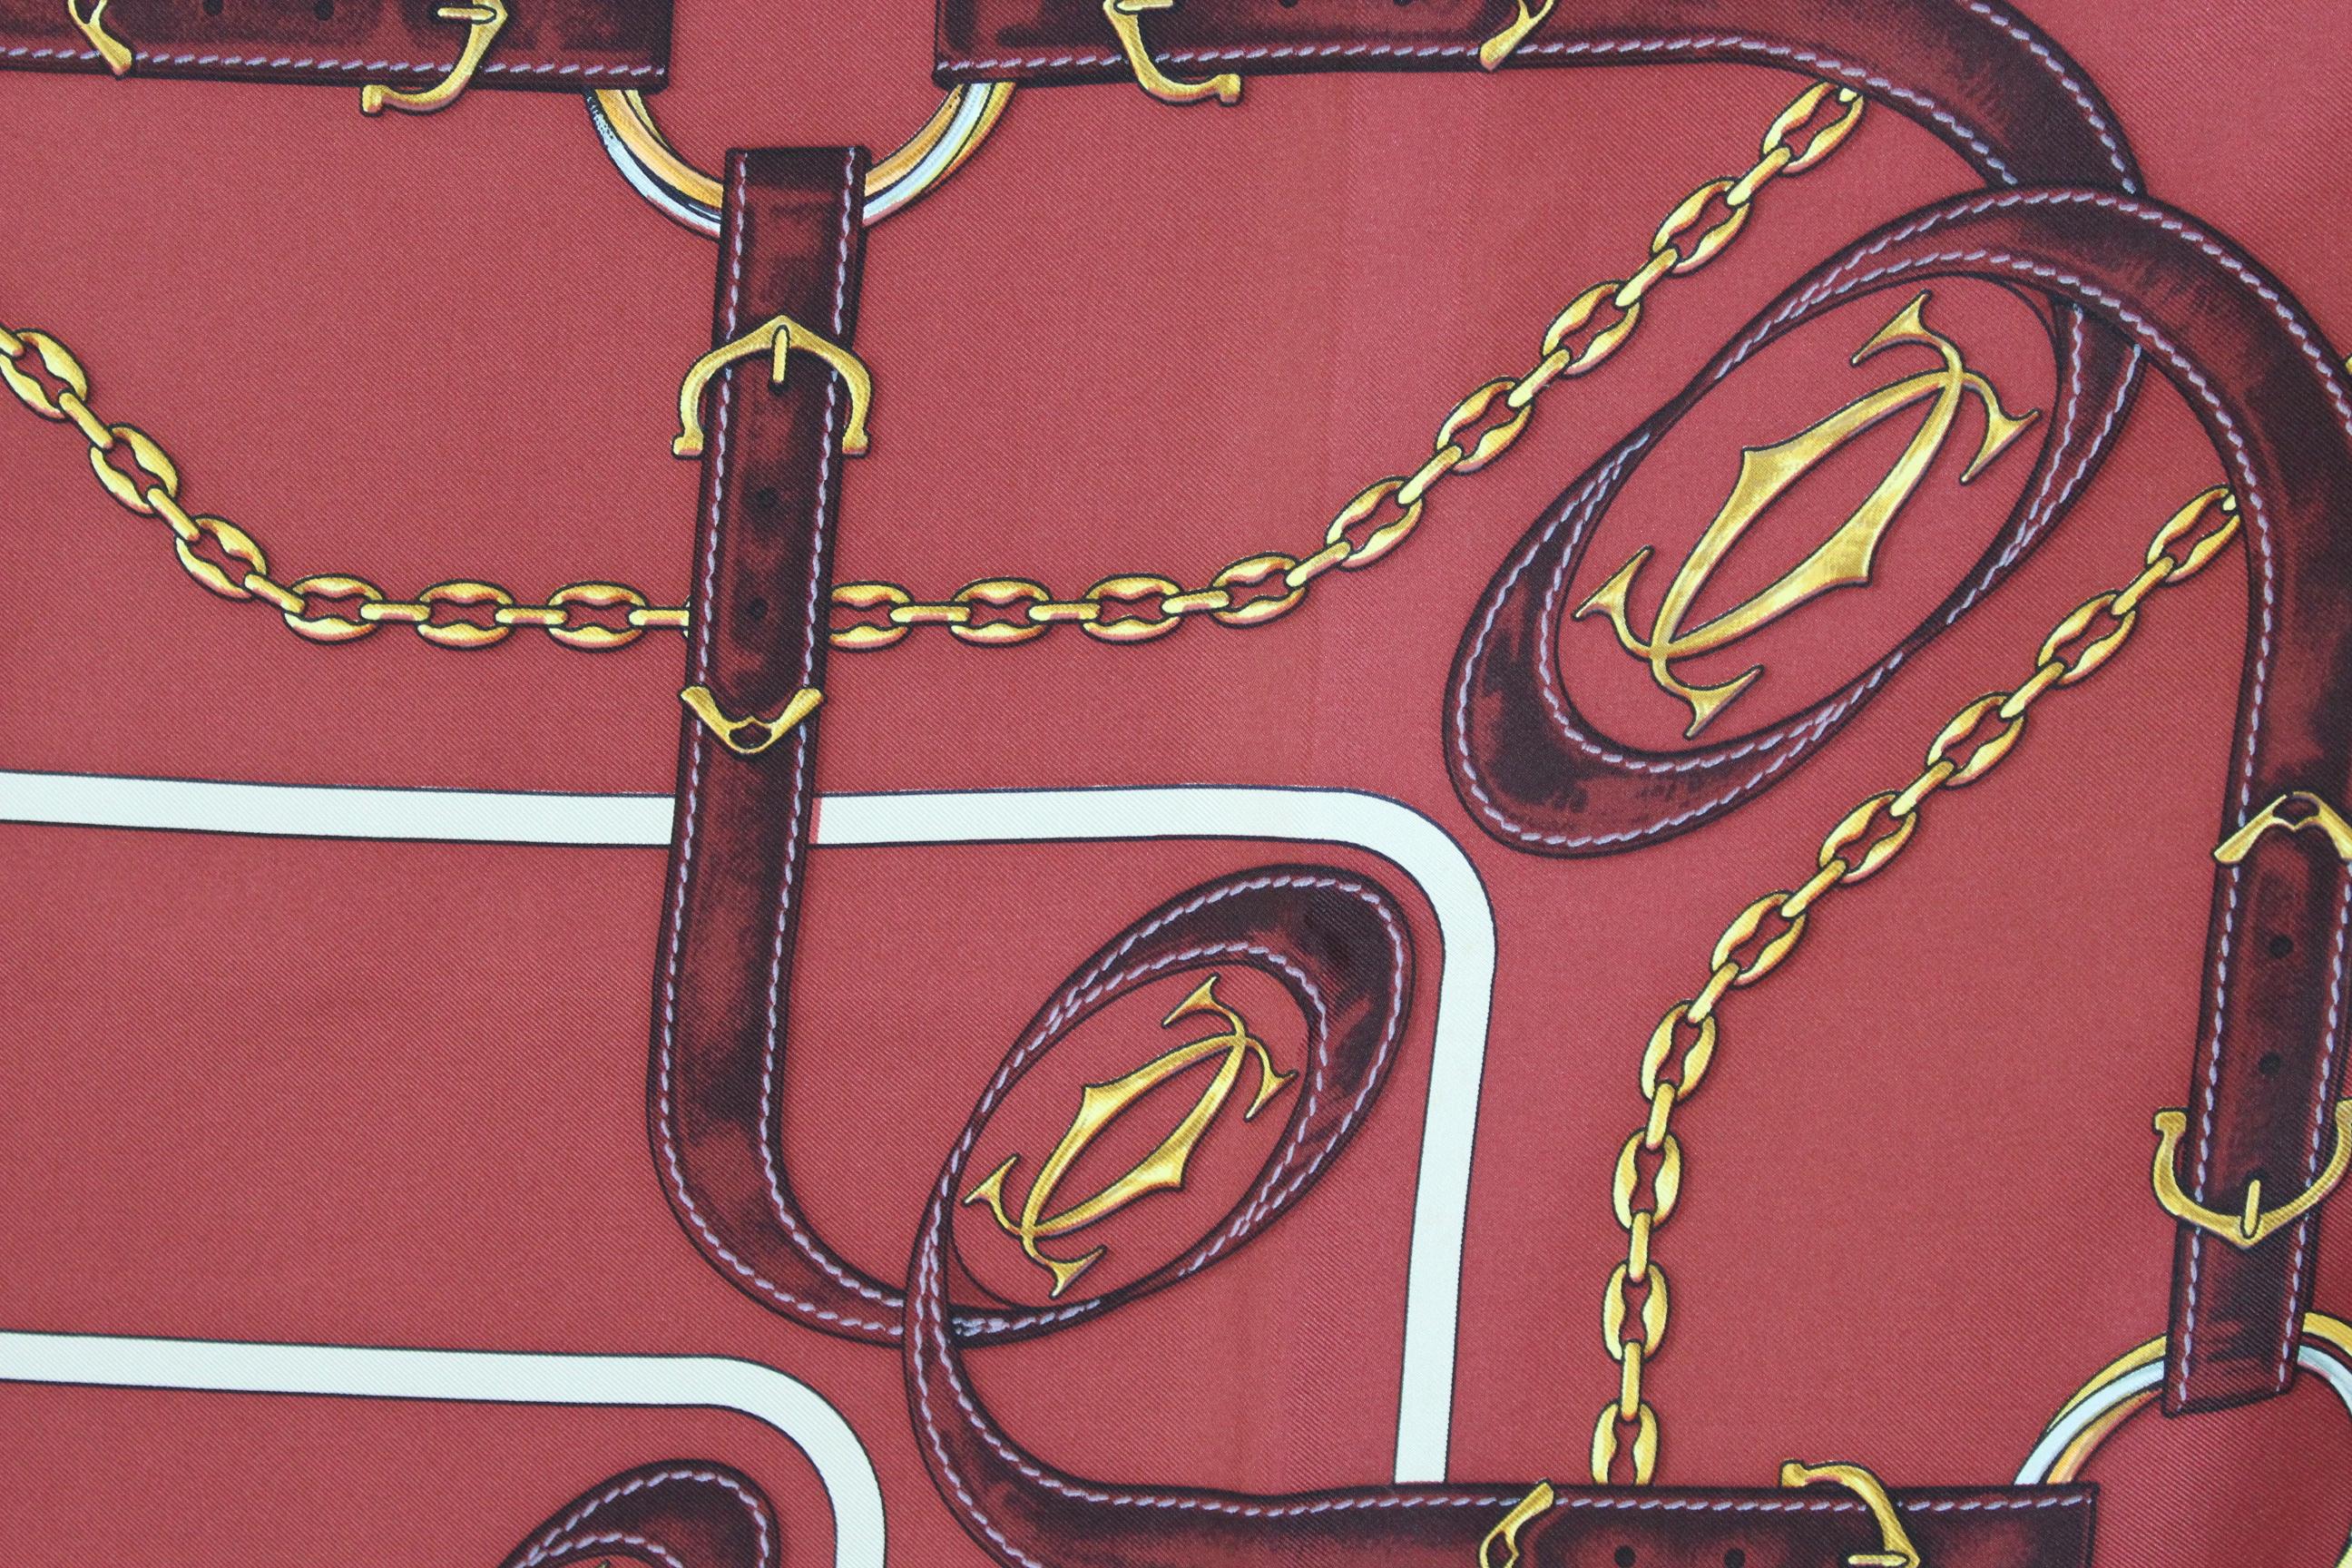 Must De Cartier vintage scarf 1980s. Burgundy color with gold and beige designs. 100% silk. Made in France. Excellent vintage conditions.

Measures: 84 x 84 cm